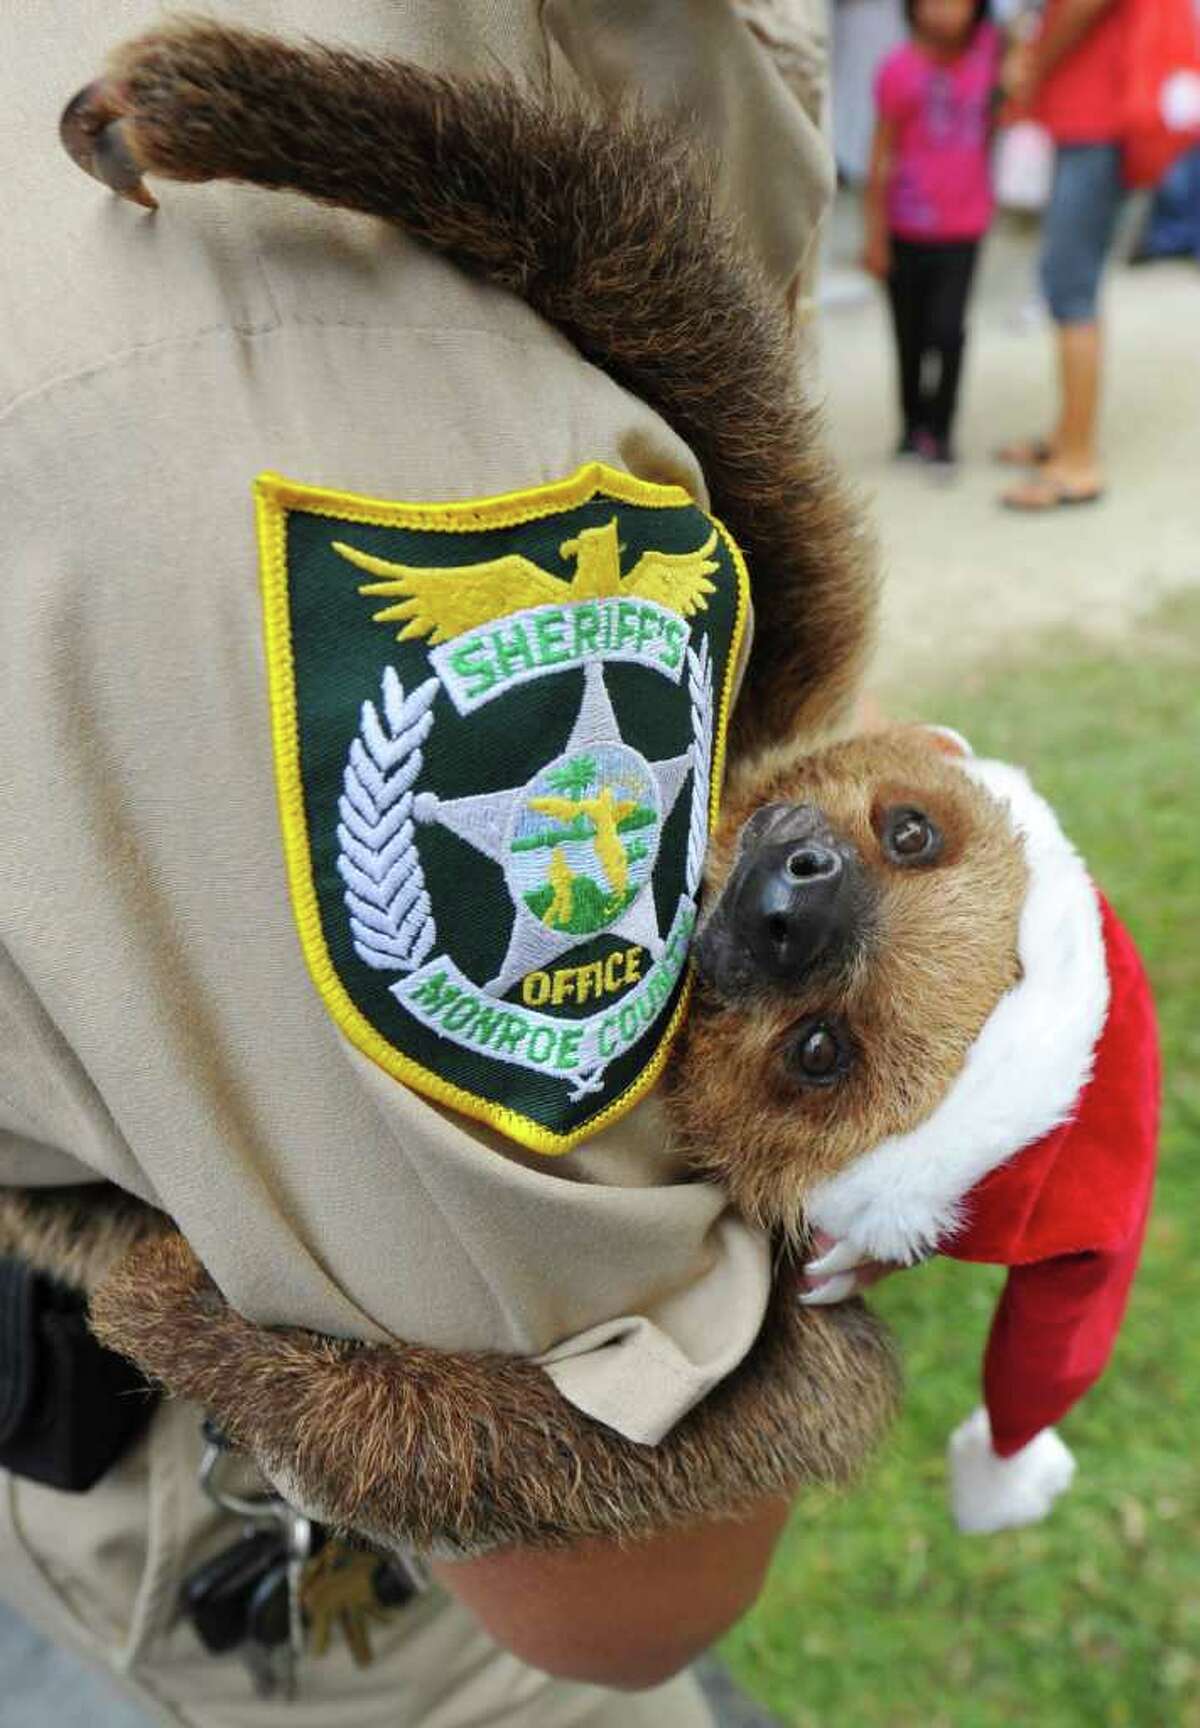 Syd, an 8-month-old two-toed sloth, hangs off the shoulder of Deputy Jeanne Selander at the Monroe County Sheriffís Officeís Animal Farm Sunday, Dec. 12, 2010, on Stock Island, just outside of Key West. The annual ëChristmas on the Farm, í which includes photo ops with Santa and Mrs. Claus, attracts more than 800 visitors to the unique facility that is set up underneath the Monroe County Jail. Horses, pigs, peacocks, snakes, a llama, tortoises, sloths, rabbits, exotic birds and a kinkajou are among the many animals that were either donated, confiscated or rescued in the Florida Keys since 1995. (AP PHOTO BY ROB O'NEAL/KEY WEST CITIZEN.)